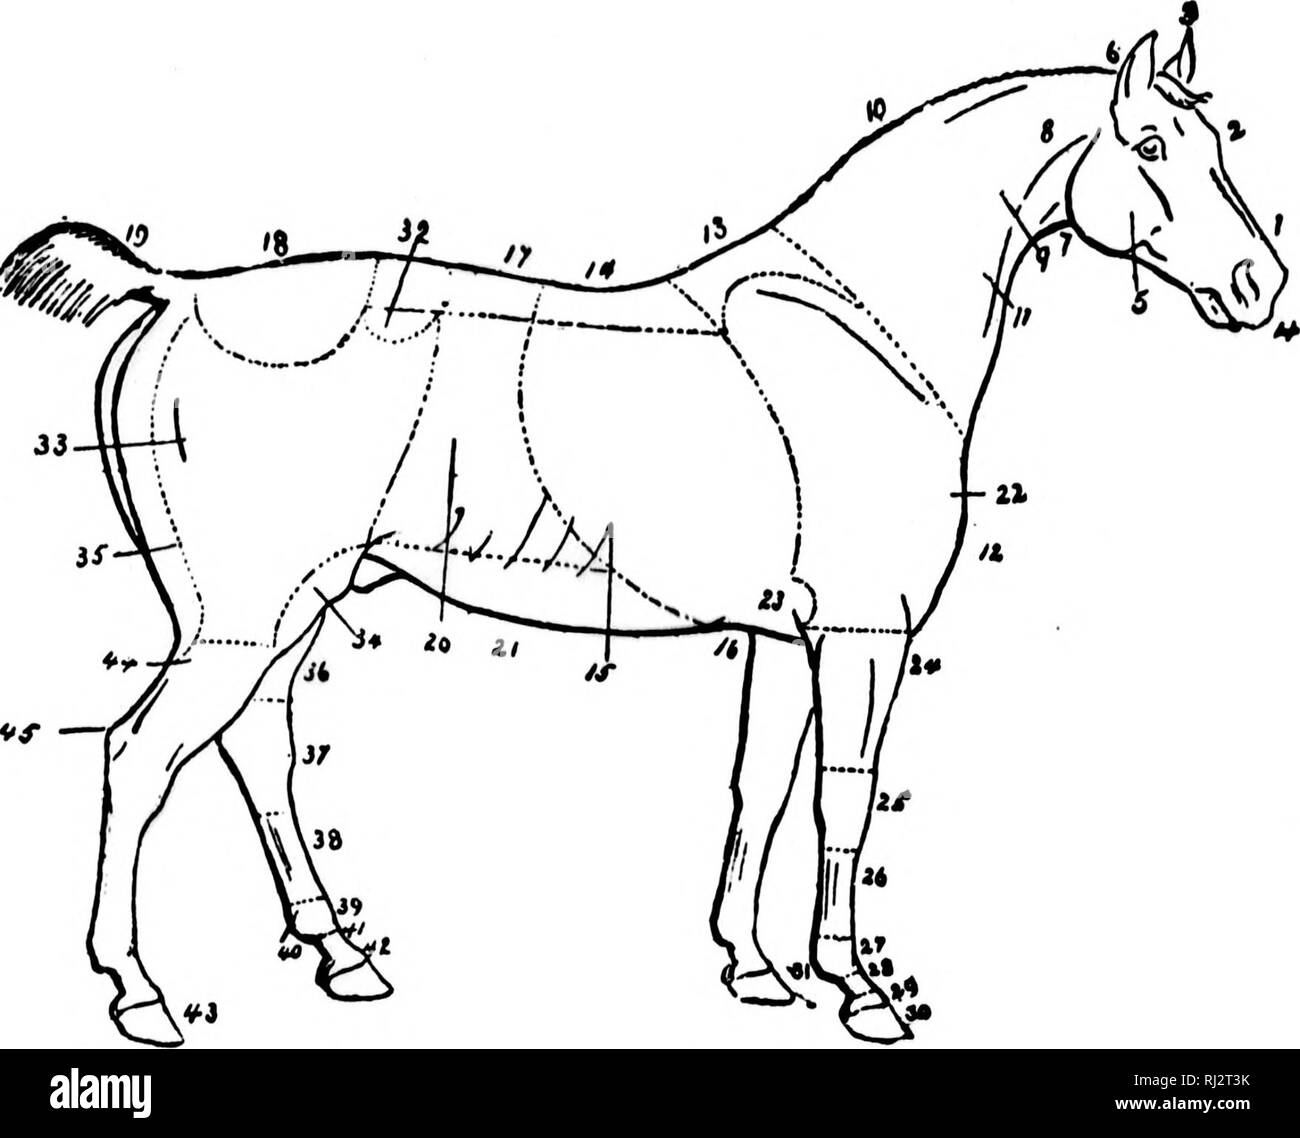 . Practical agriculture [microform]. Agriculture; Agriculture. 124 AGRICULTURE. I] &lt;C^. Fig. 68. The External Parts of the Horse. I. 3. 3- 4- 5- 6. 7- 8. 9- lo. II. 12. 13- 14. 15- 16. 17- 18. 19. 20. 21. 22. 23- Face. P'orehead. Ears. Muzzle. Cheek or fowl. Poll. Throat. Aarotid. Neck. Crest. Jugular Channel or Furrow. Hreast. Withers. Pack. Ribs. Girth. Loins. Croup. Dock. Flank. Belly. Point of shoulder. Elbow. 24. 25. 26. 27- 28. 29. 30- 3&gt;- 32- 33- 34- 35- 36. 37- 38 39- 40. 41. 42. 43- 44. 45« Forearm. Knee. Canon or shank. Fetlock joint. Pastern. Coronet. Foot. Ergot and fetlock.  Stock Photo